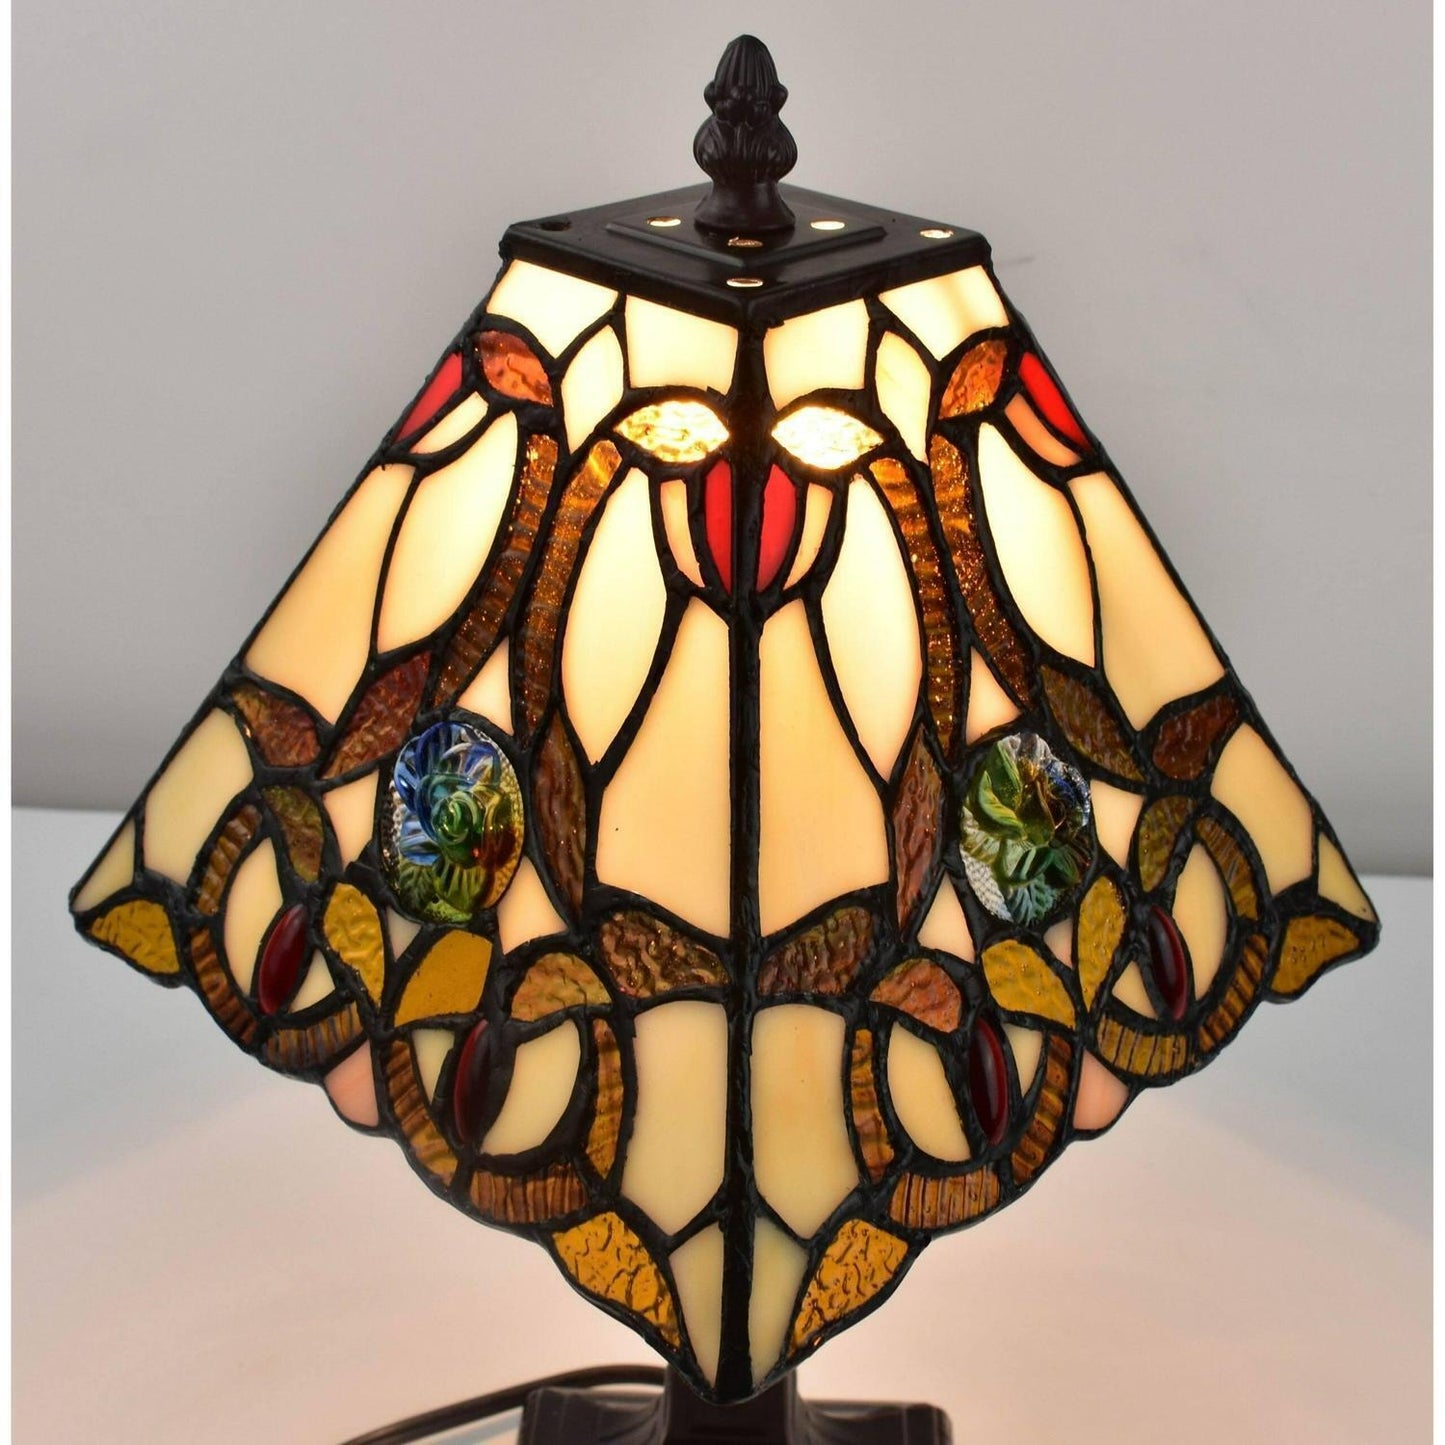 16-inch Tiffany Style Stained Glass Mini Floral Mission Accent Table Lamp